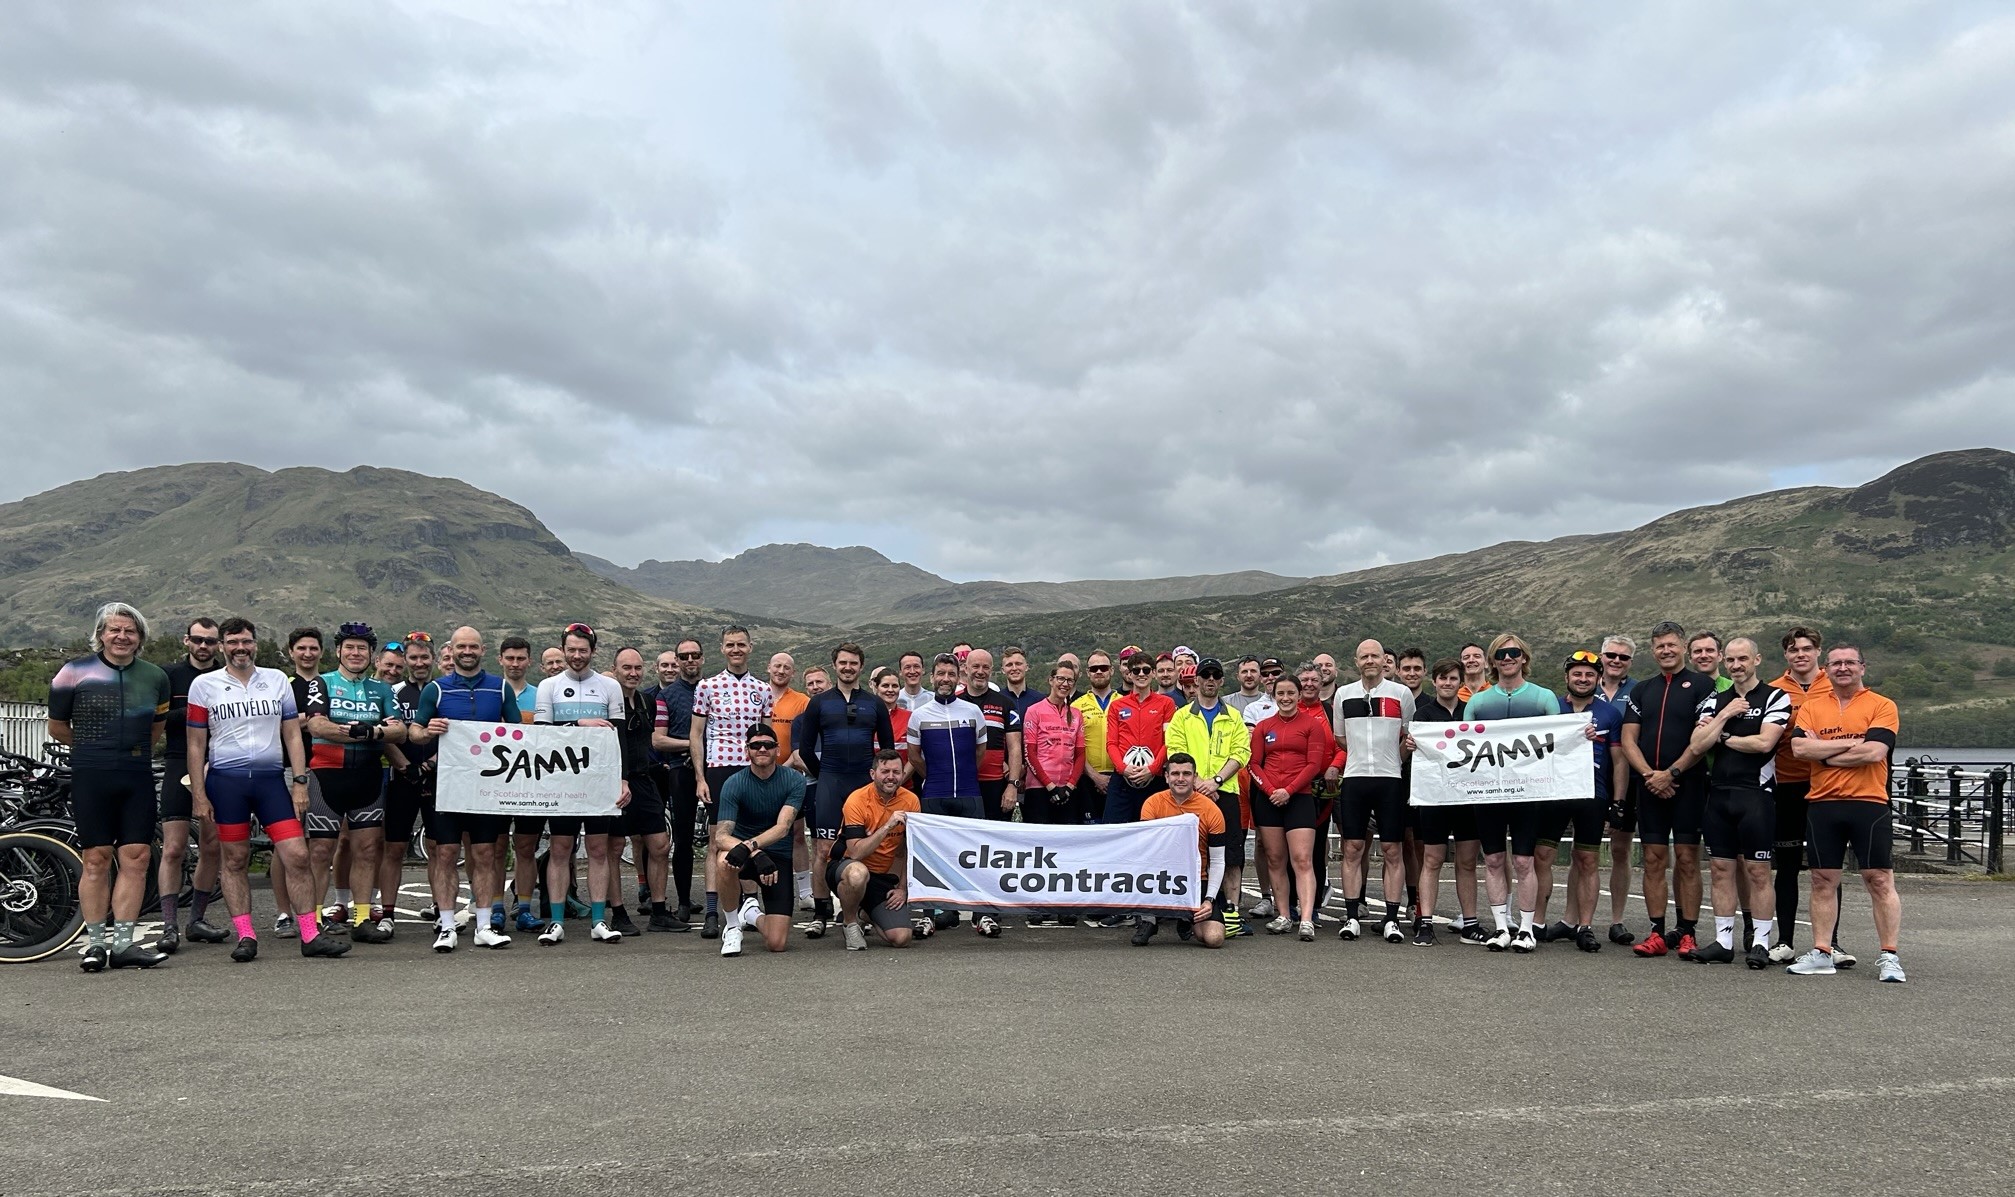 Clark Contracts raises over £2,000 for SAMH at 11th annual ‘Spring’ Classic